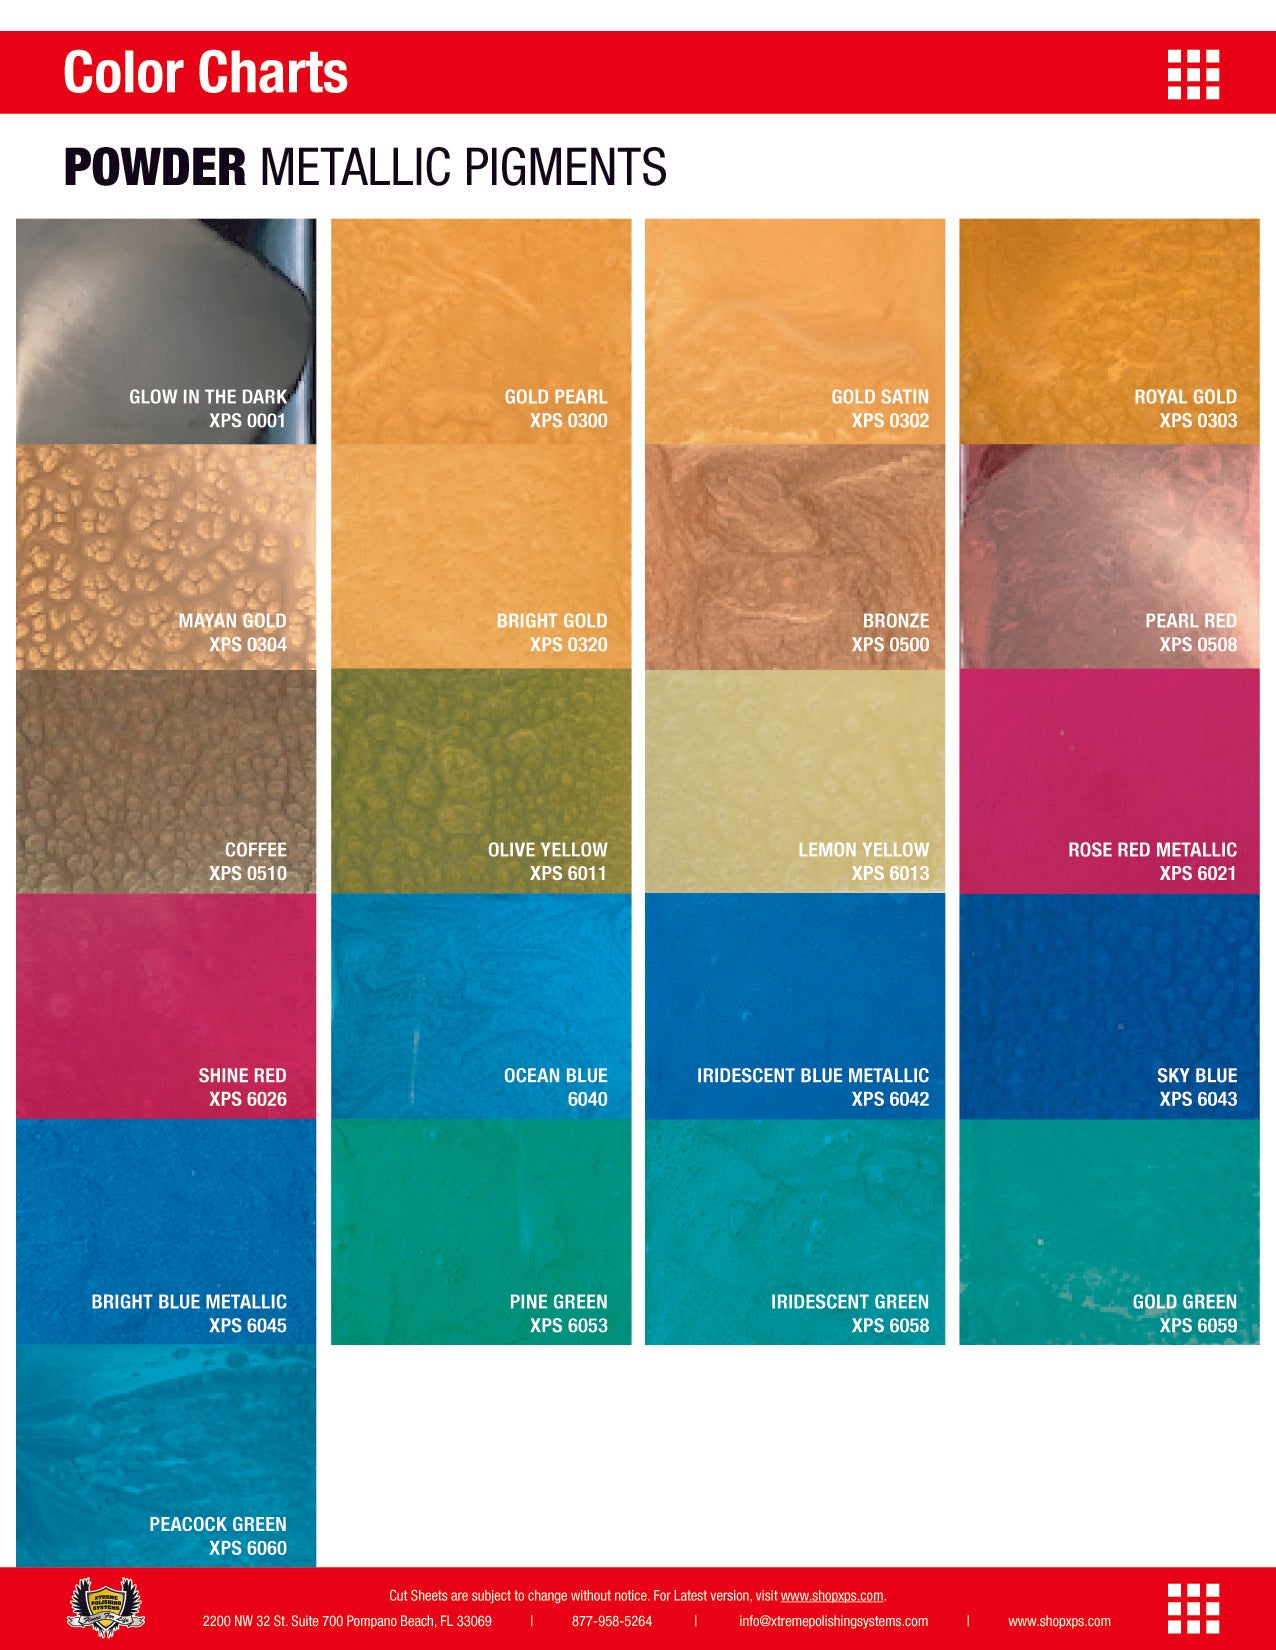 Powder Metallic Pigments Color Chart with color swatches and number